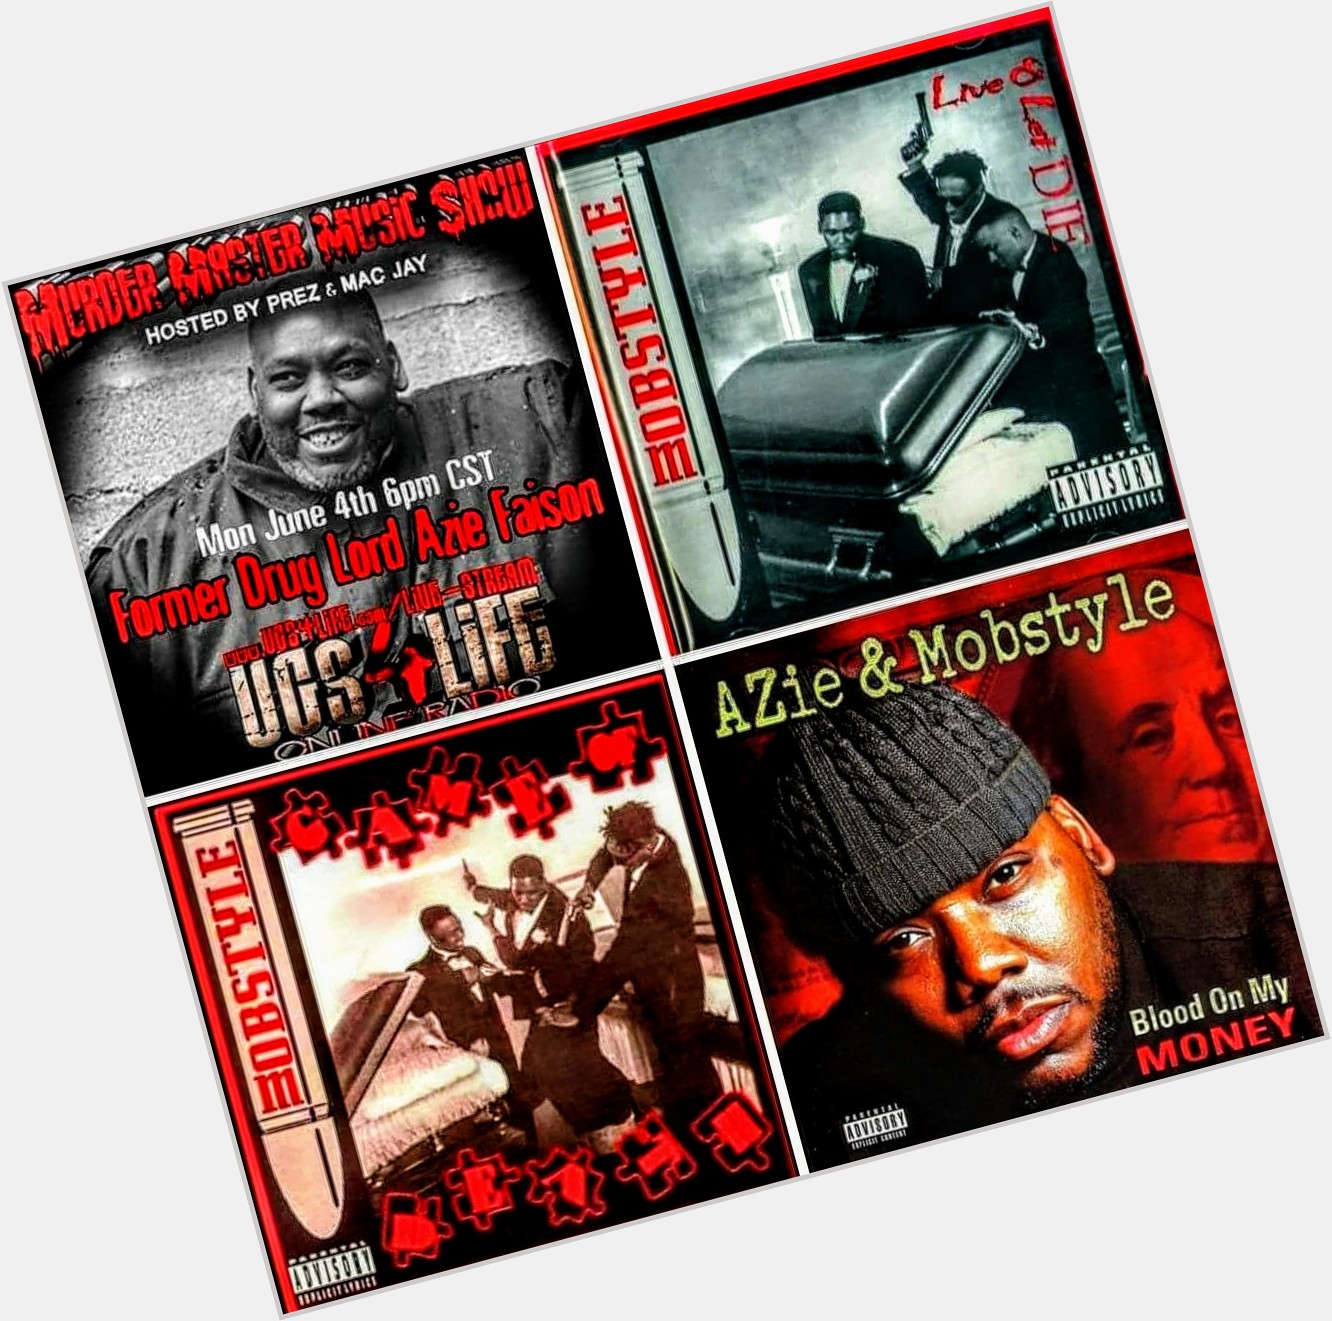 Happy Birthday Azie Faison AZIE FAISON OF MOBSTYLE from Murder Master Music Show 